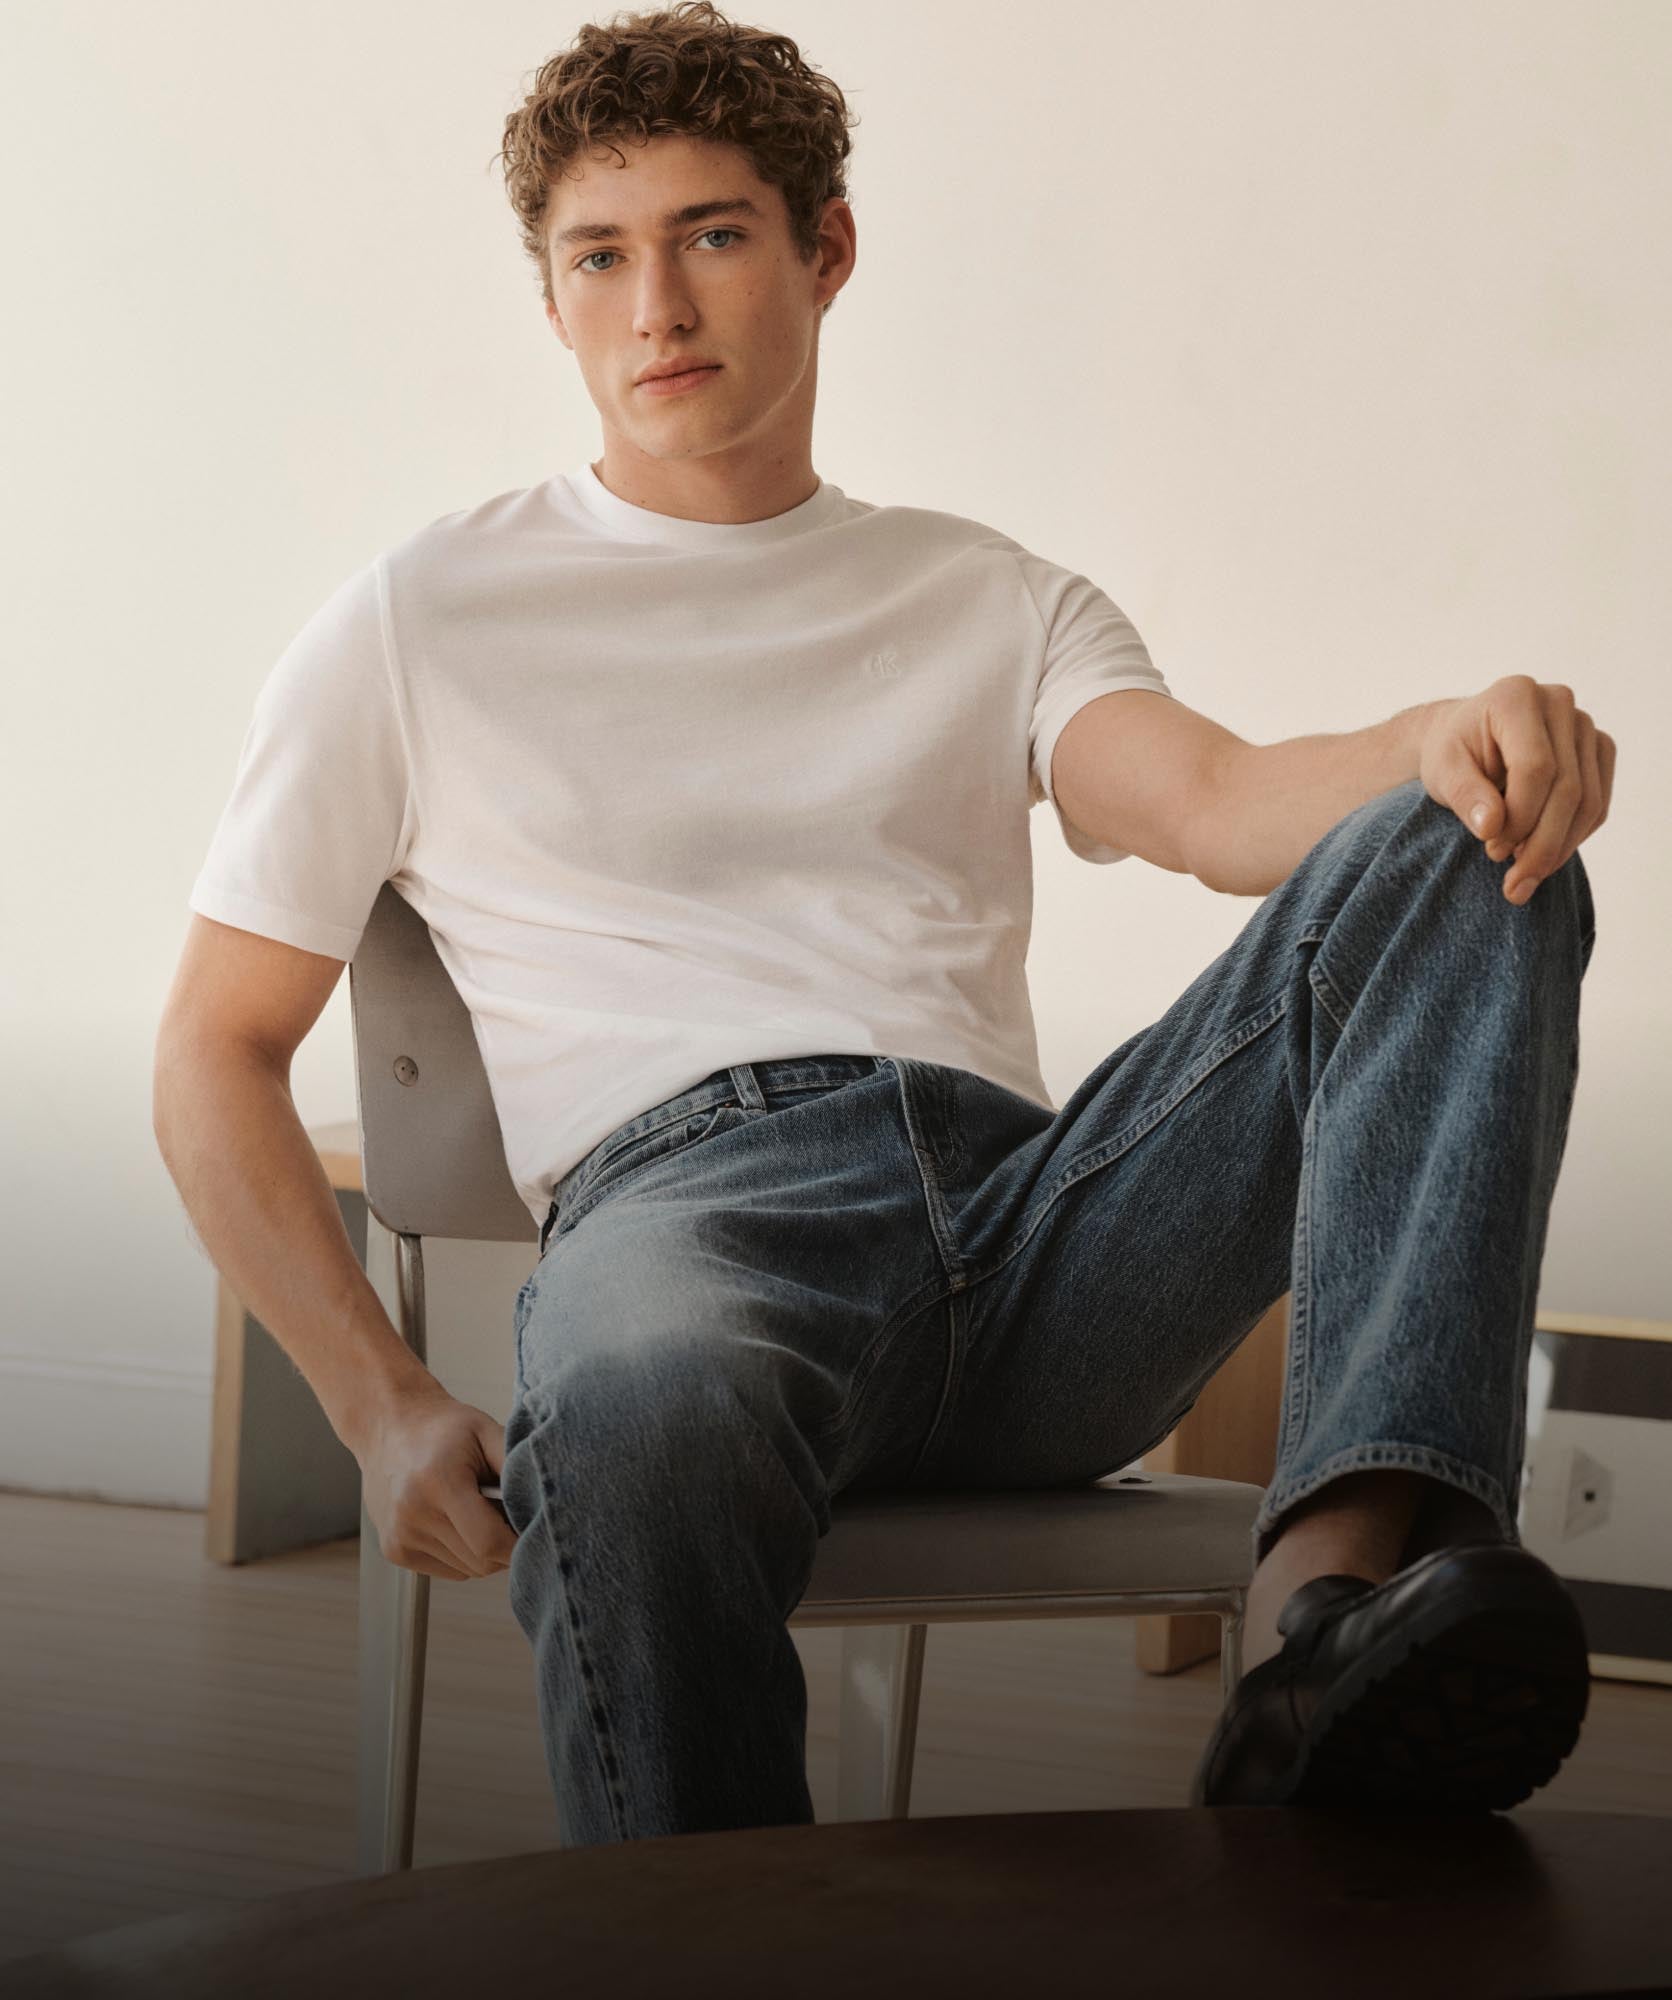 A male model leaning back in a chair with his leg up wearing a white t-shirt and medium wash blue jeans